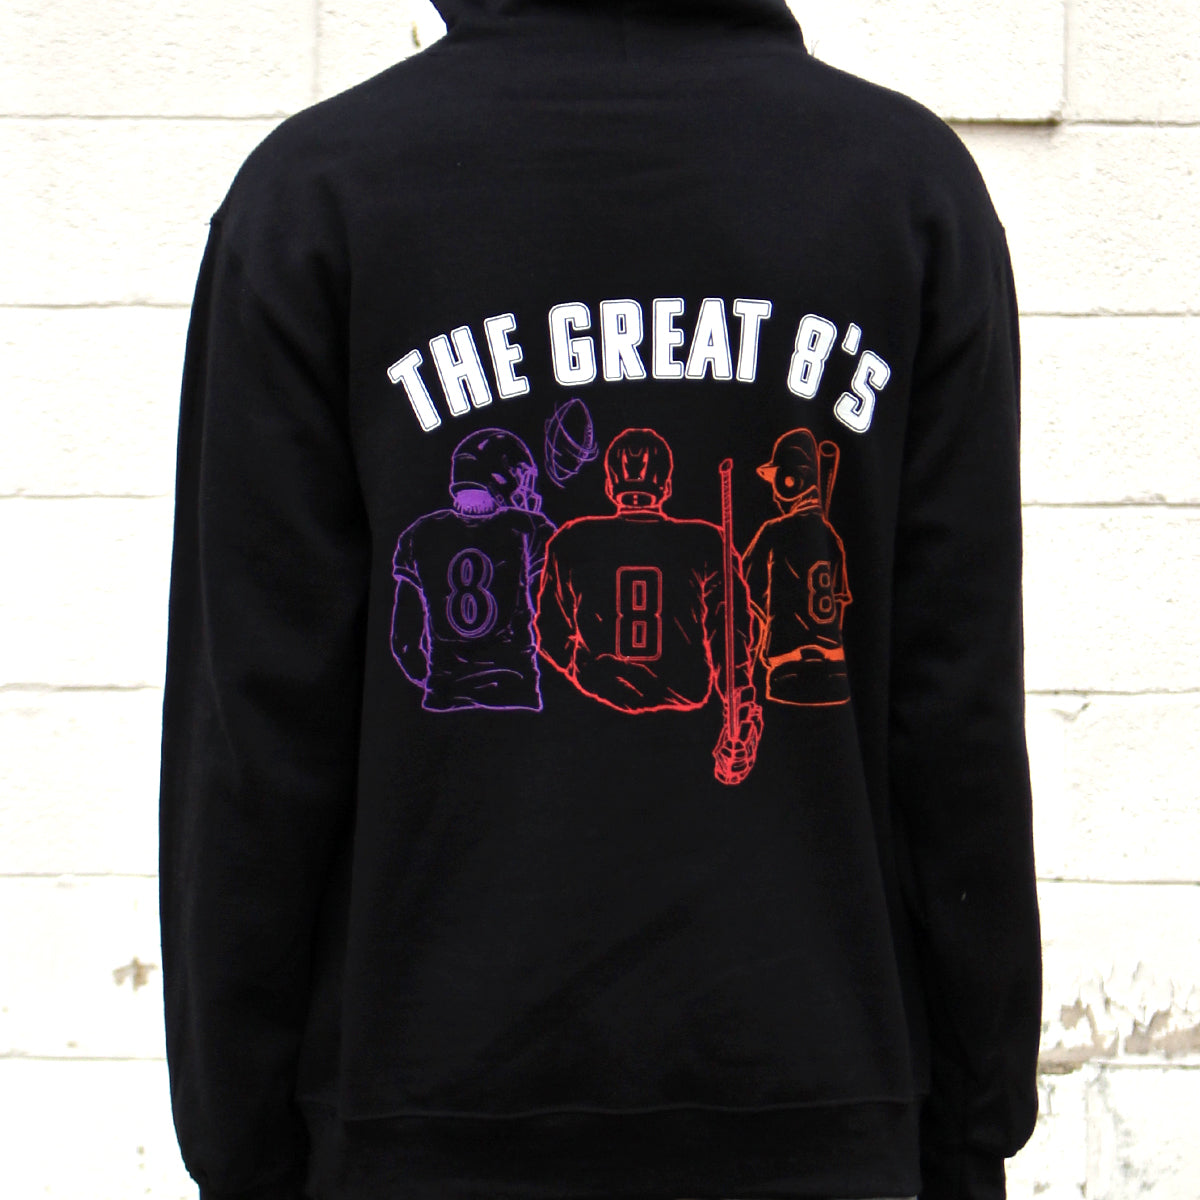 The Great 8's - Maryland Edition (Black) / Hoodie - Route One Apparel